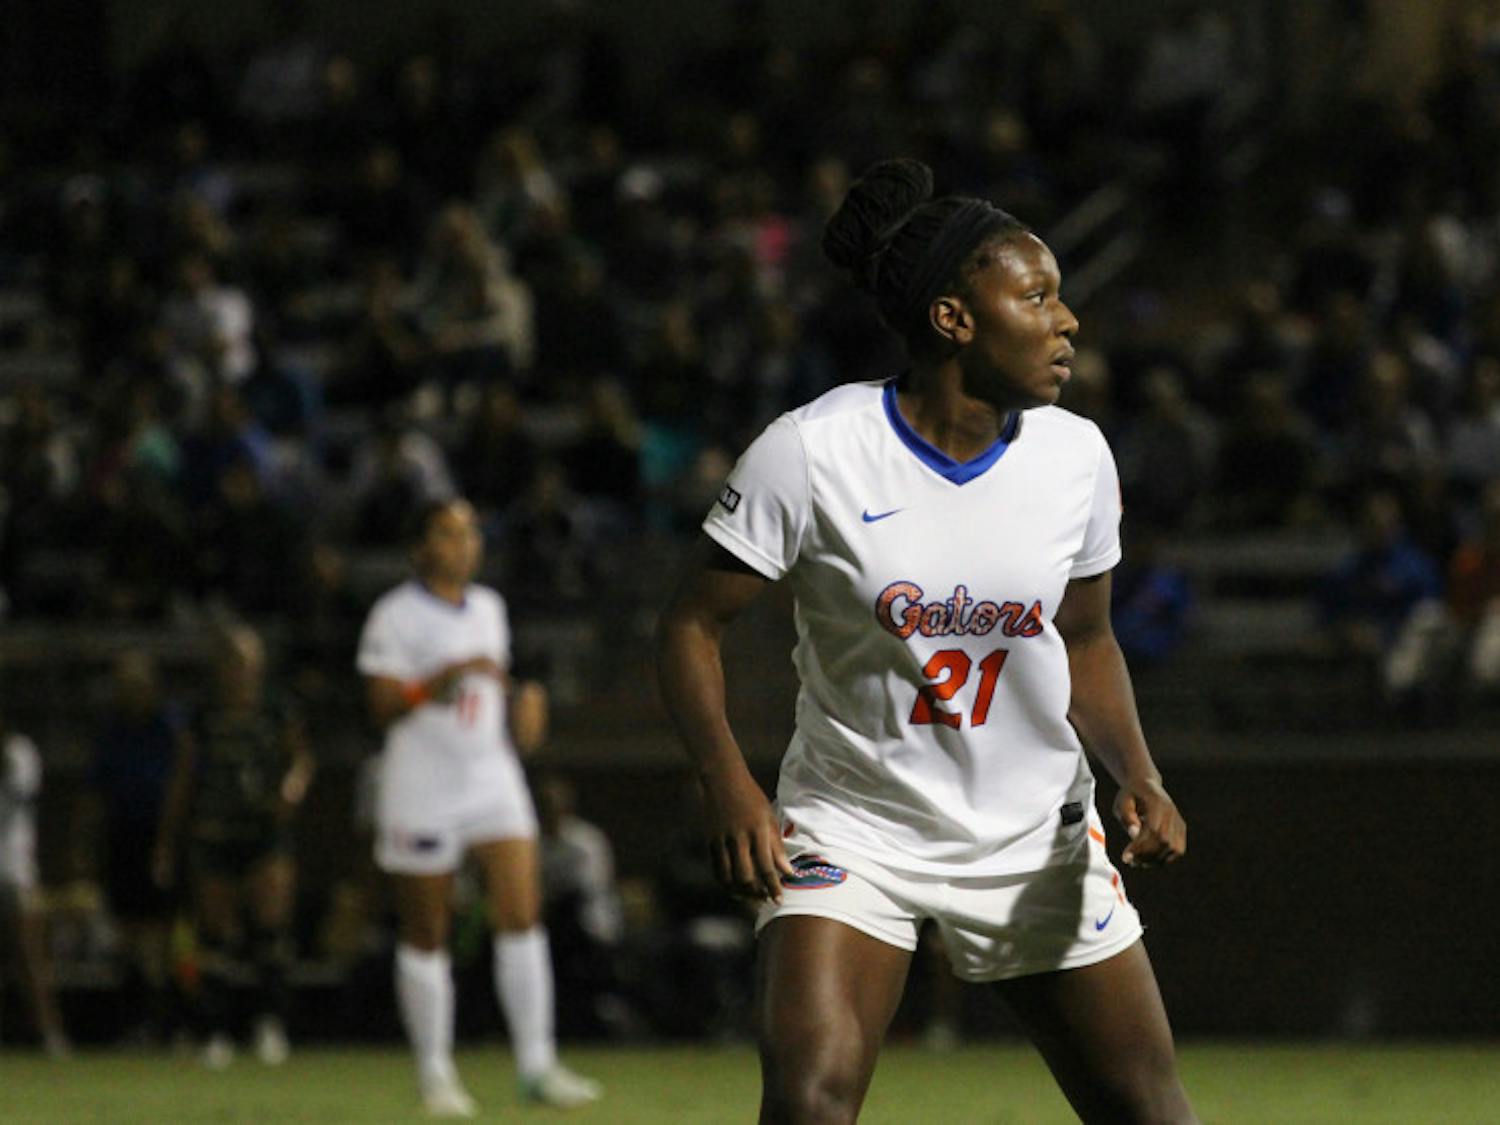 The Gators will miss star forward Deanne Rose, who's on international duty with the Canadian national team, when they host No. 9 Tennessee on Thursday. 